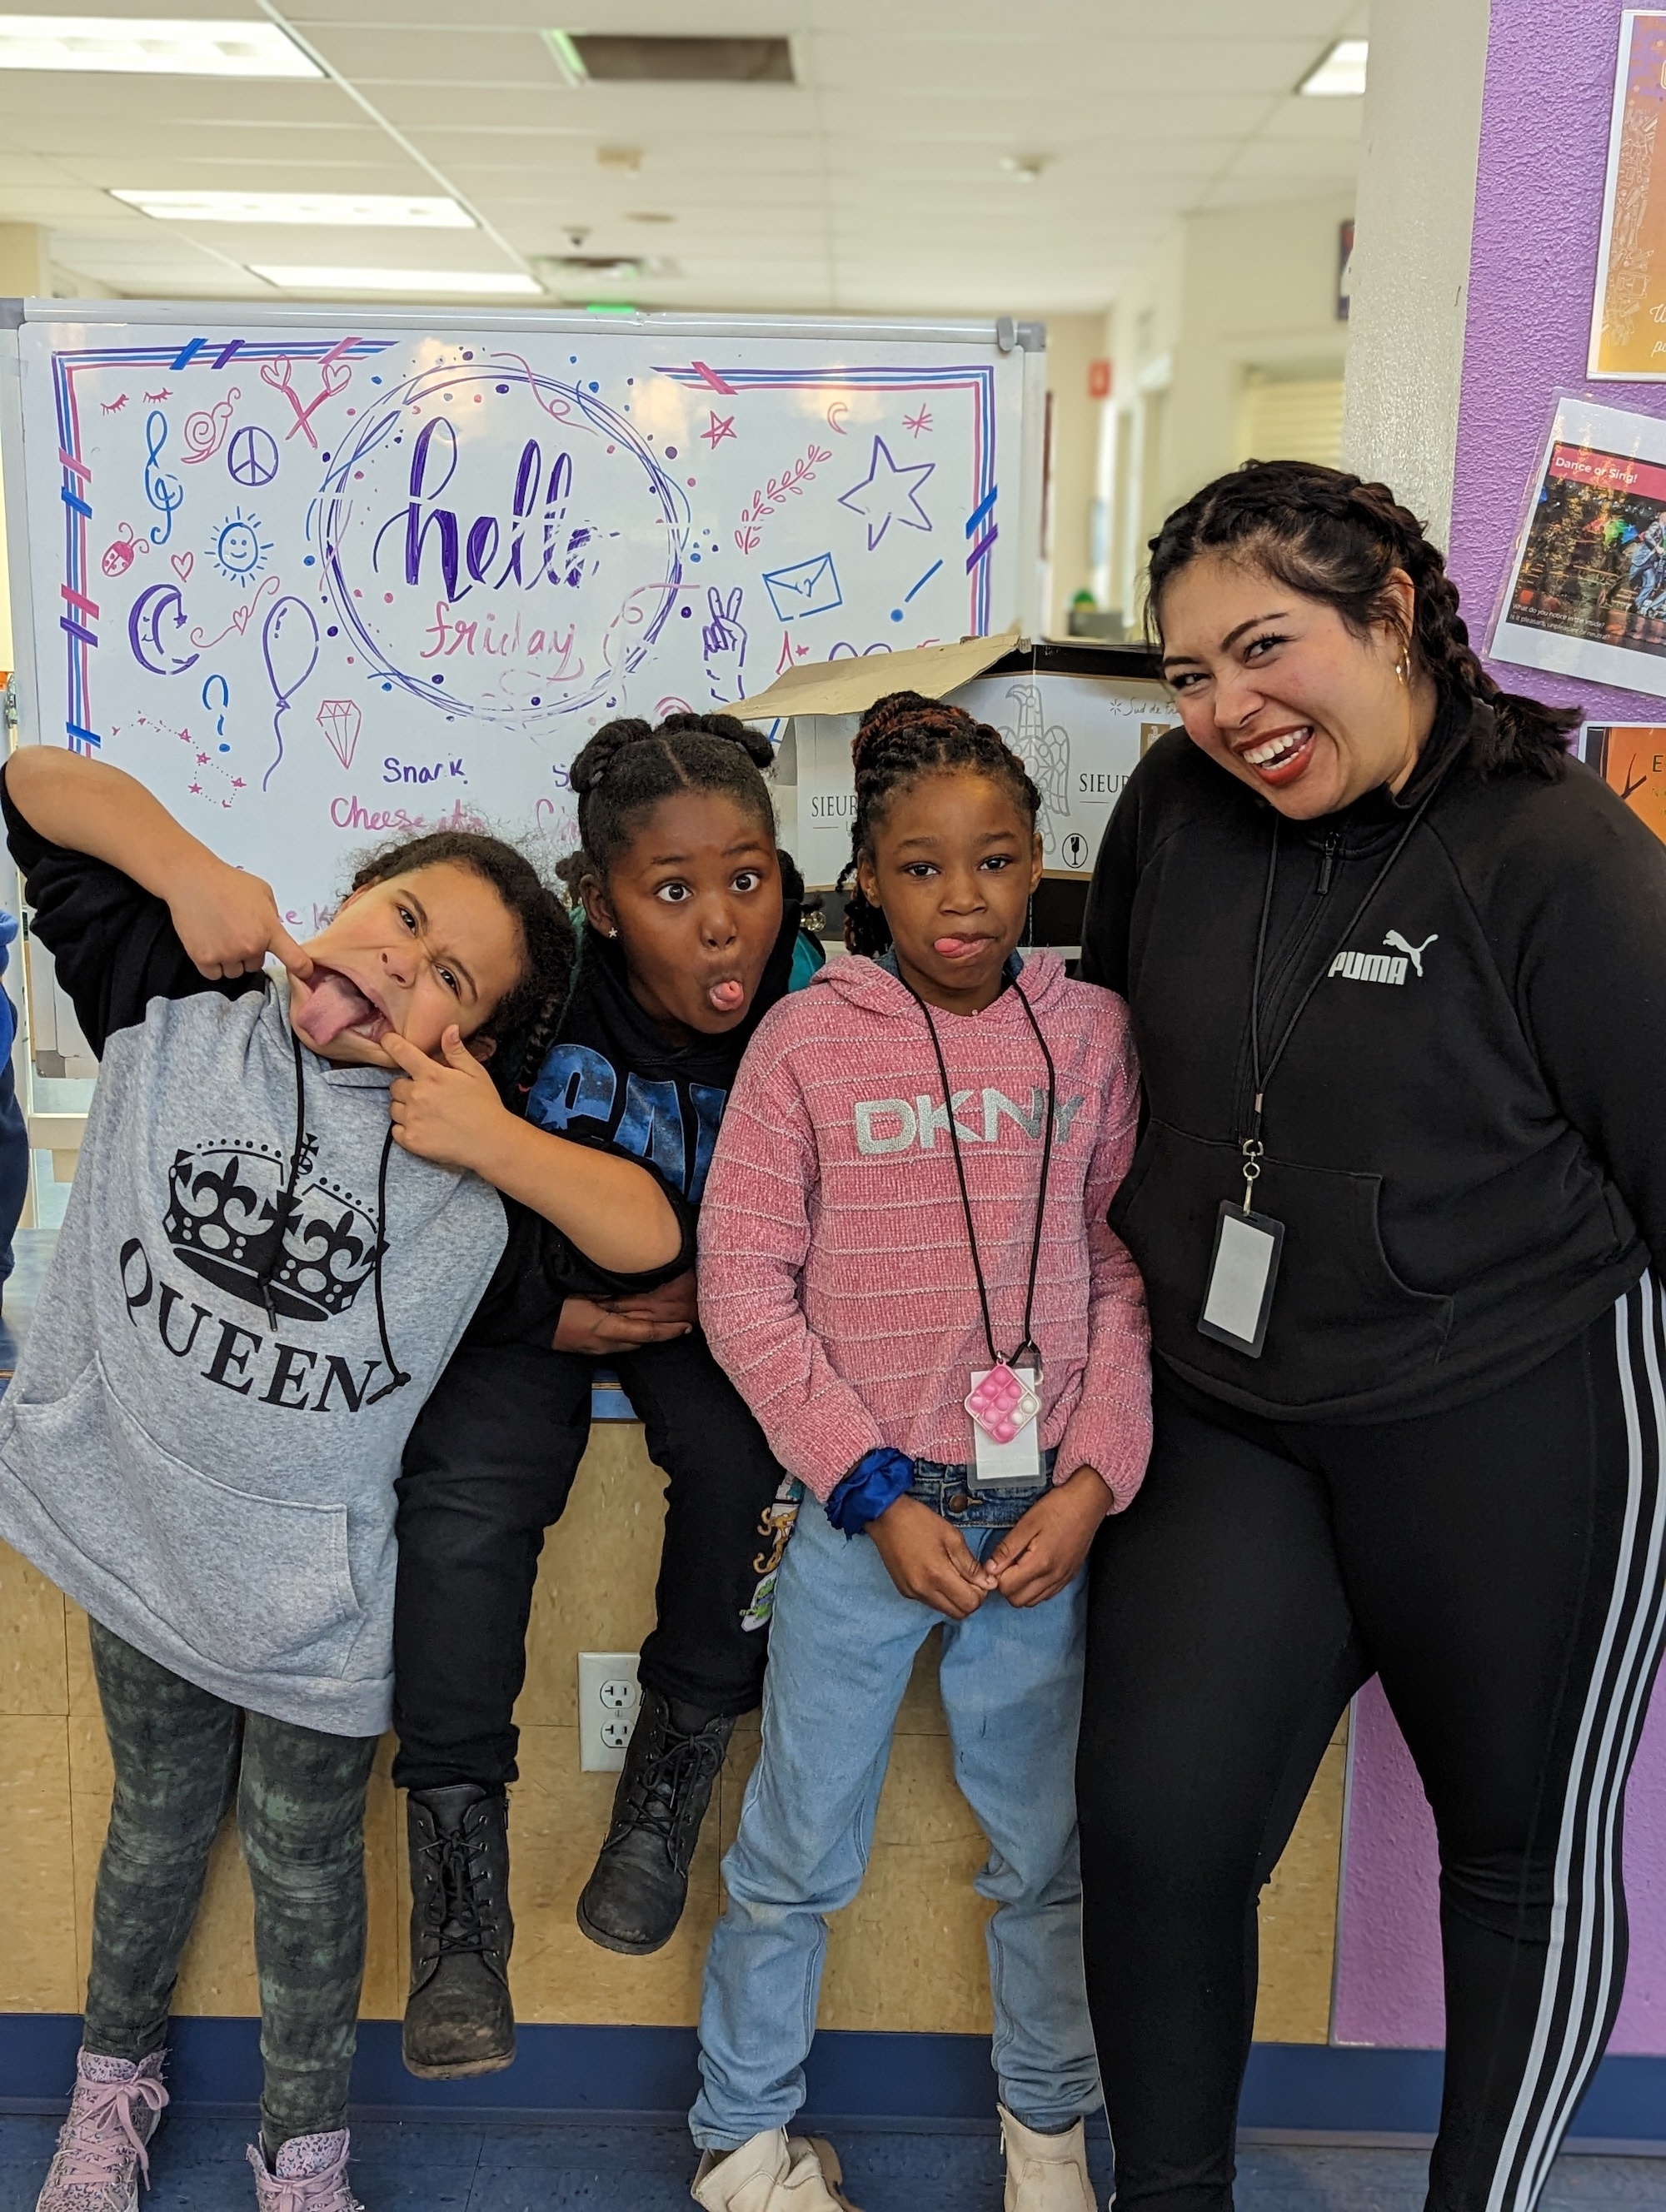 CAVE volunteer poses with children at the Boys and Girls Club